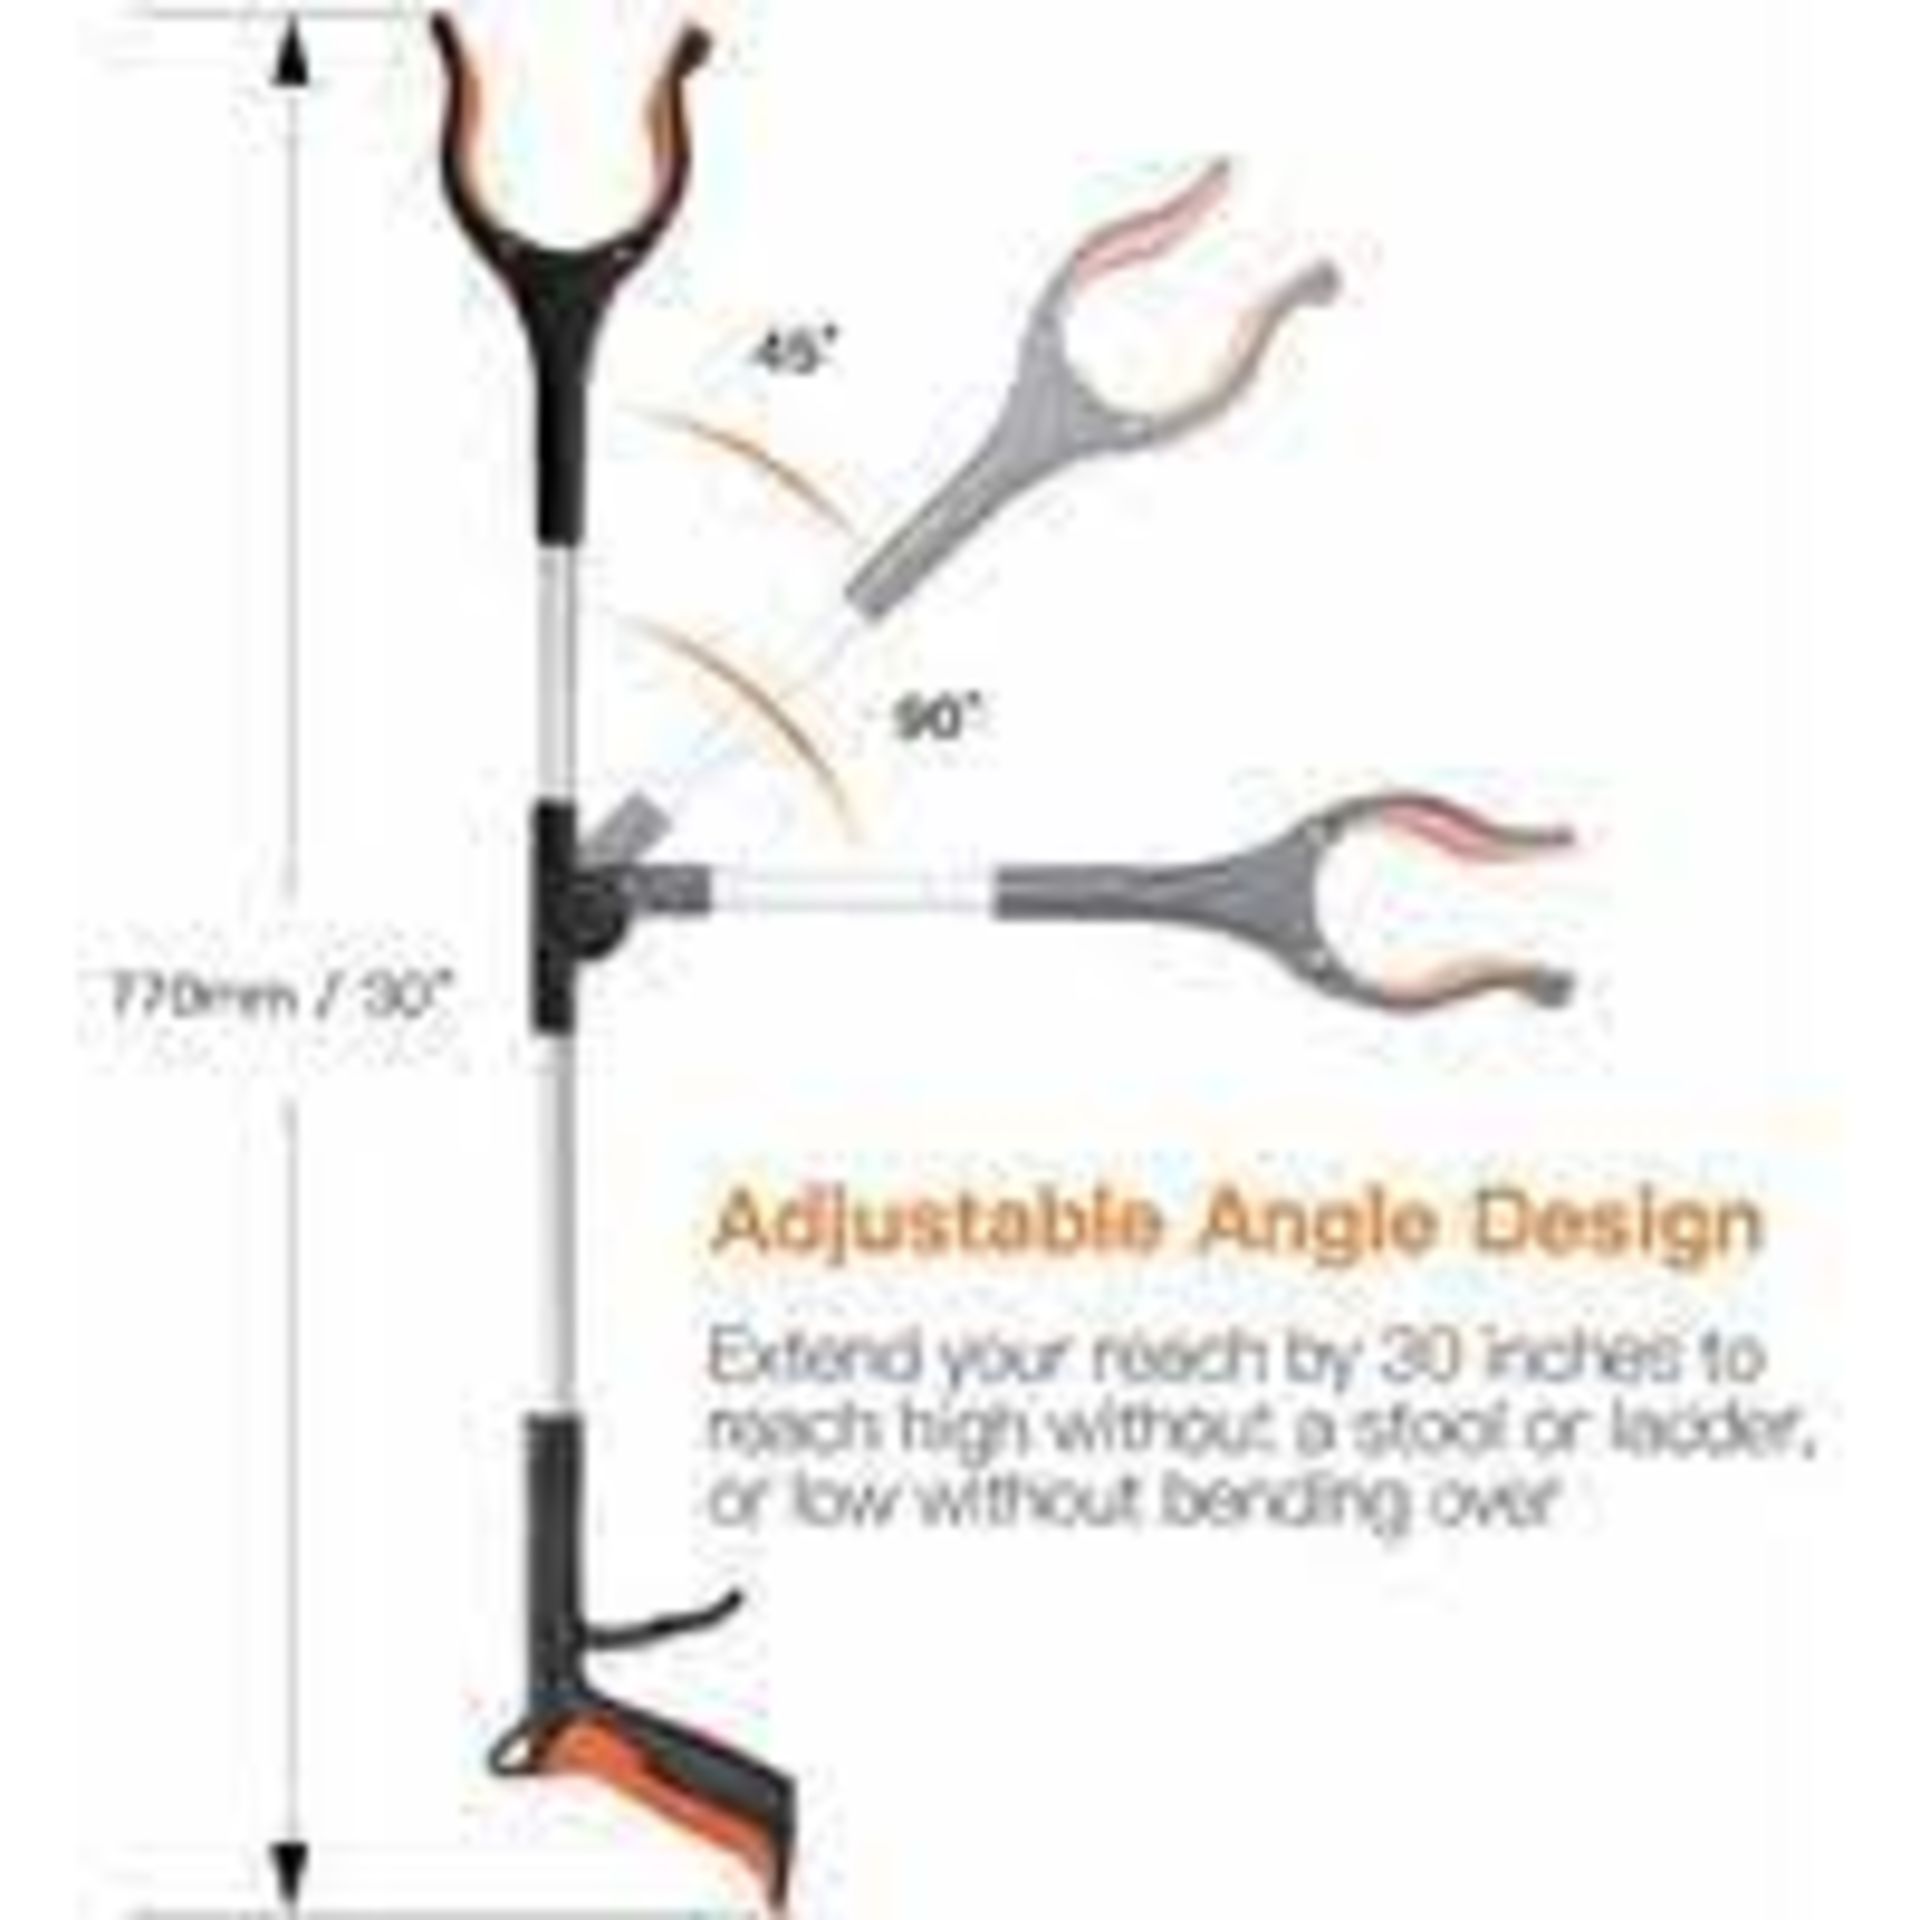 10 x NEW PACKAGED TACKLIFE Upgrade Reacher Grabber Tool, 0°-180° Angled Arm, 90° Rotating Head- - Image 2 of 2